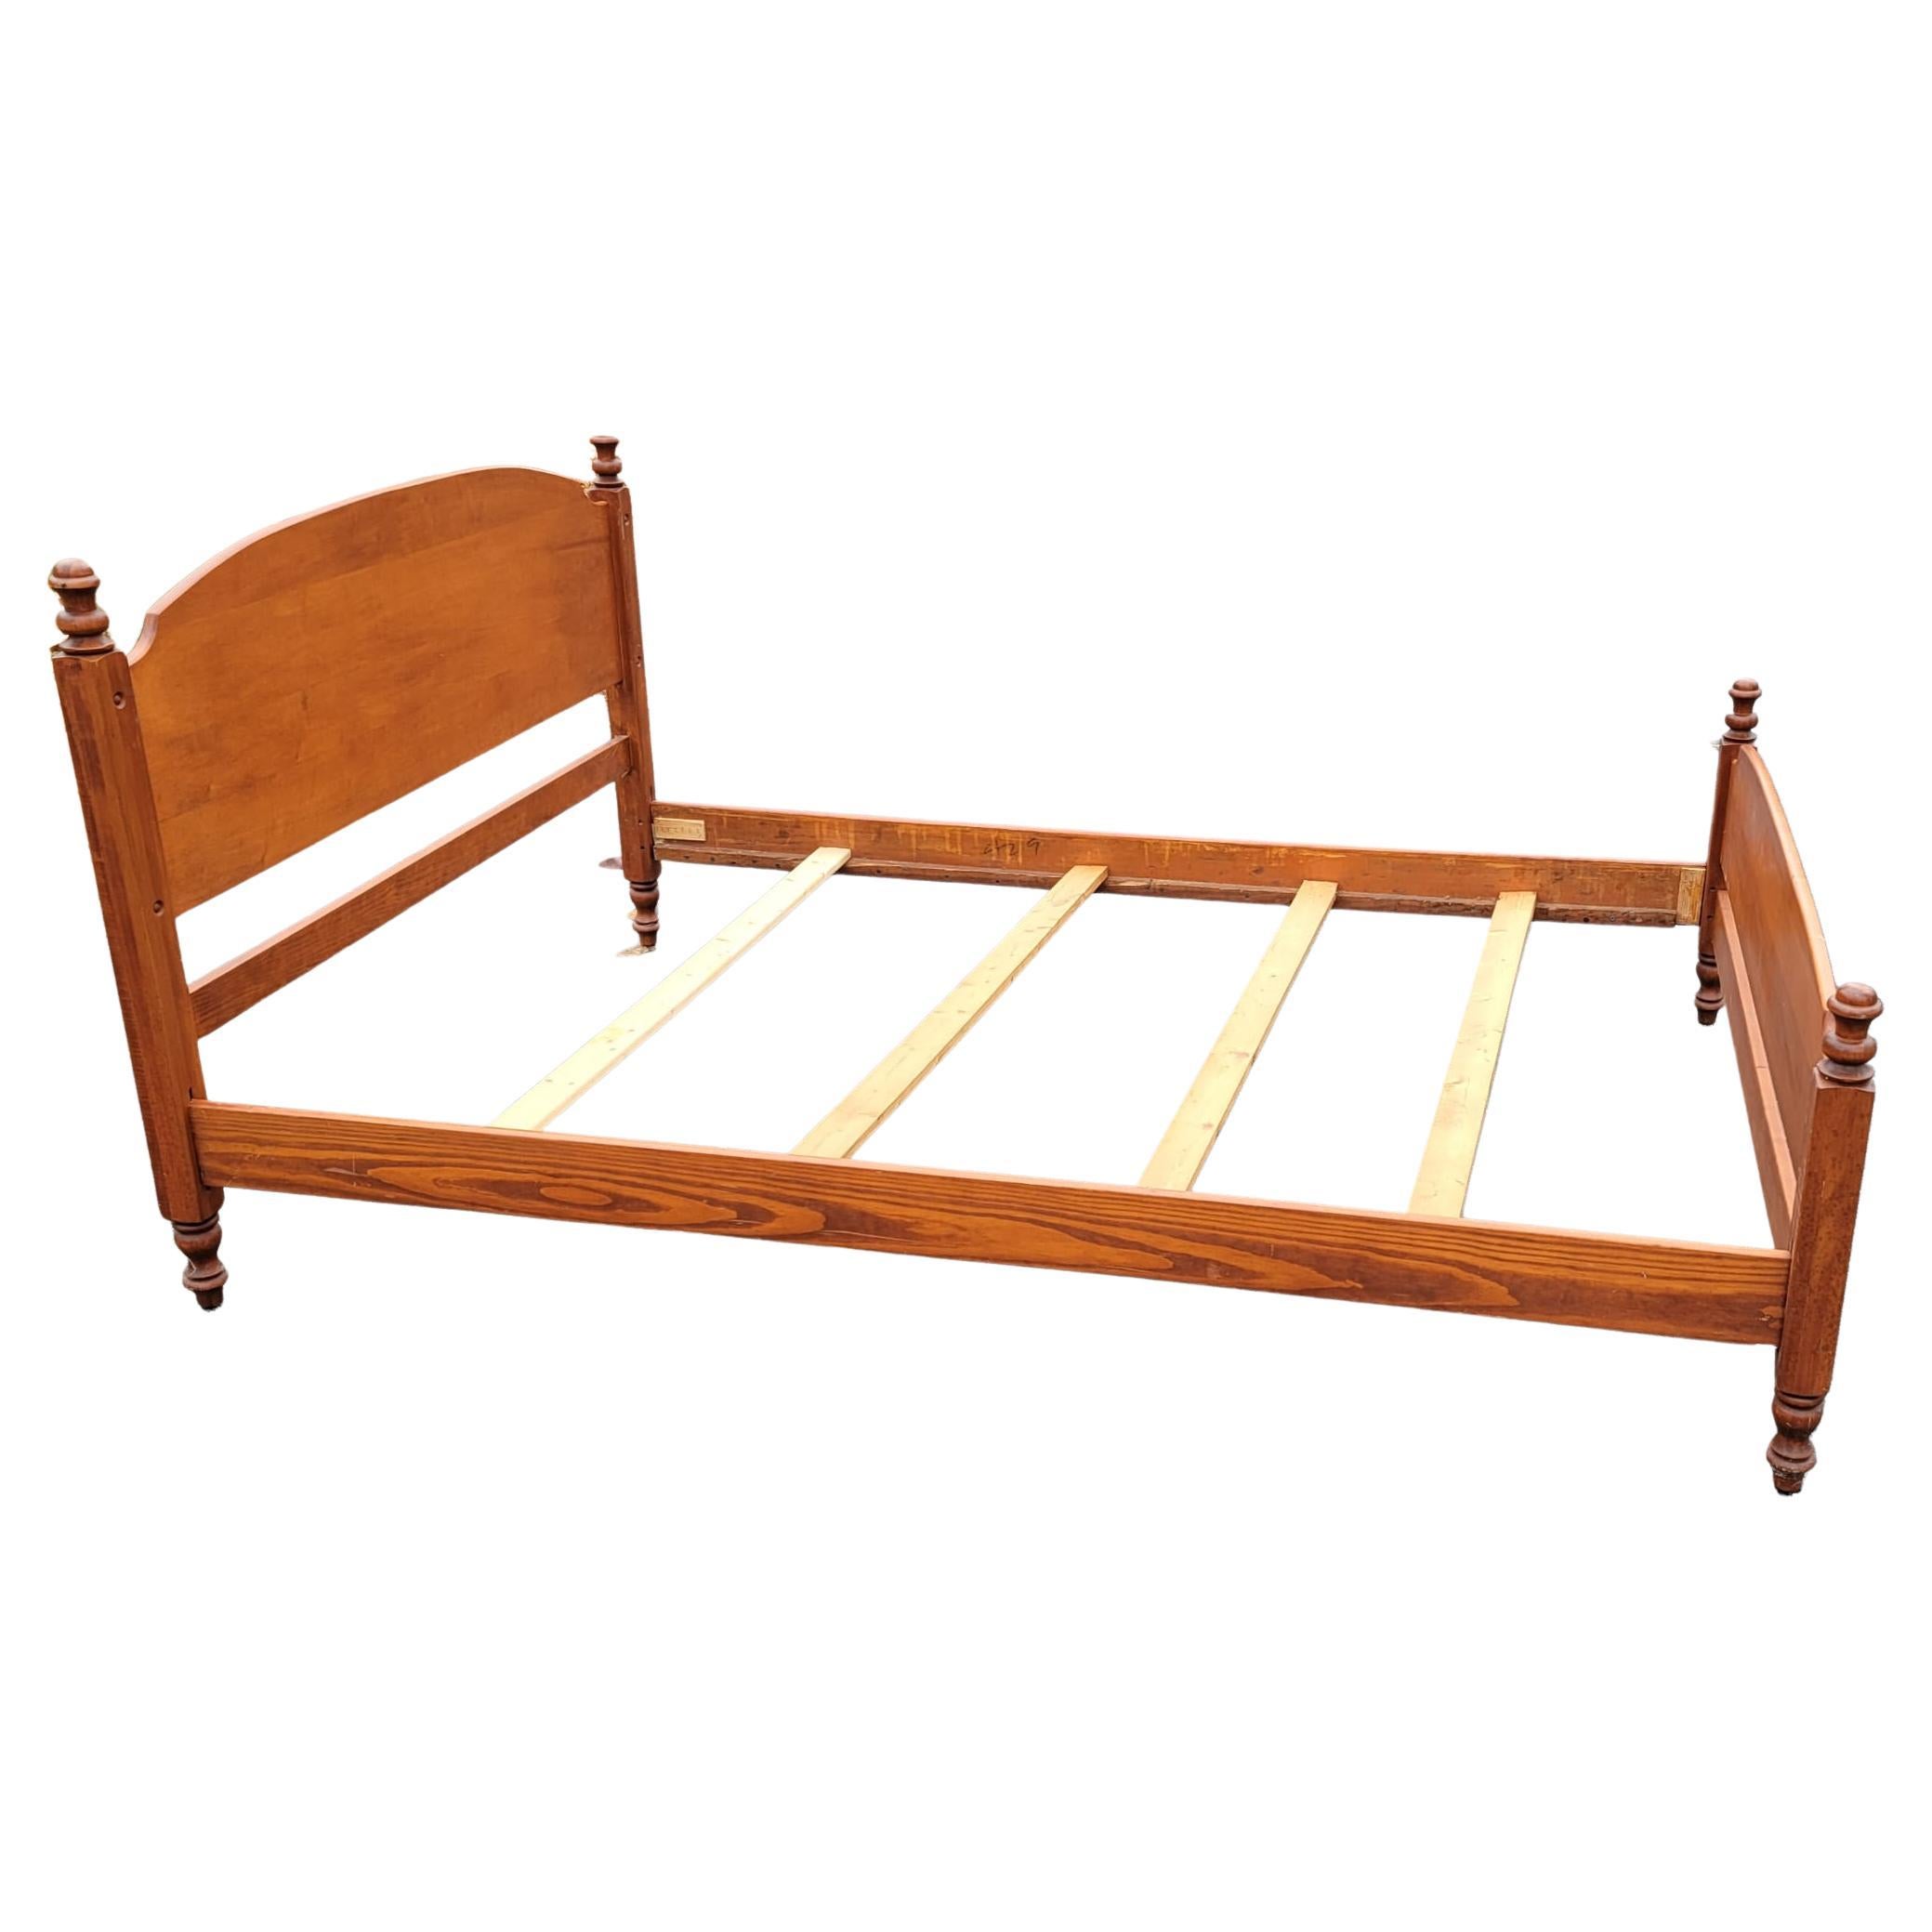 An American classical colonial style maple full size bedstead in good vintage condition. Measure 80.5